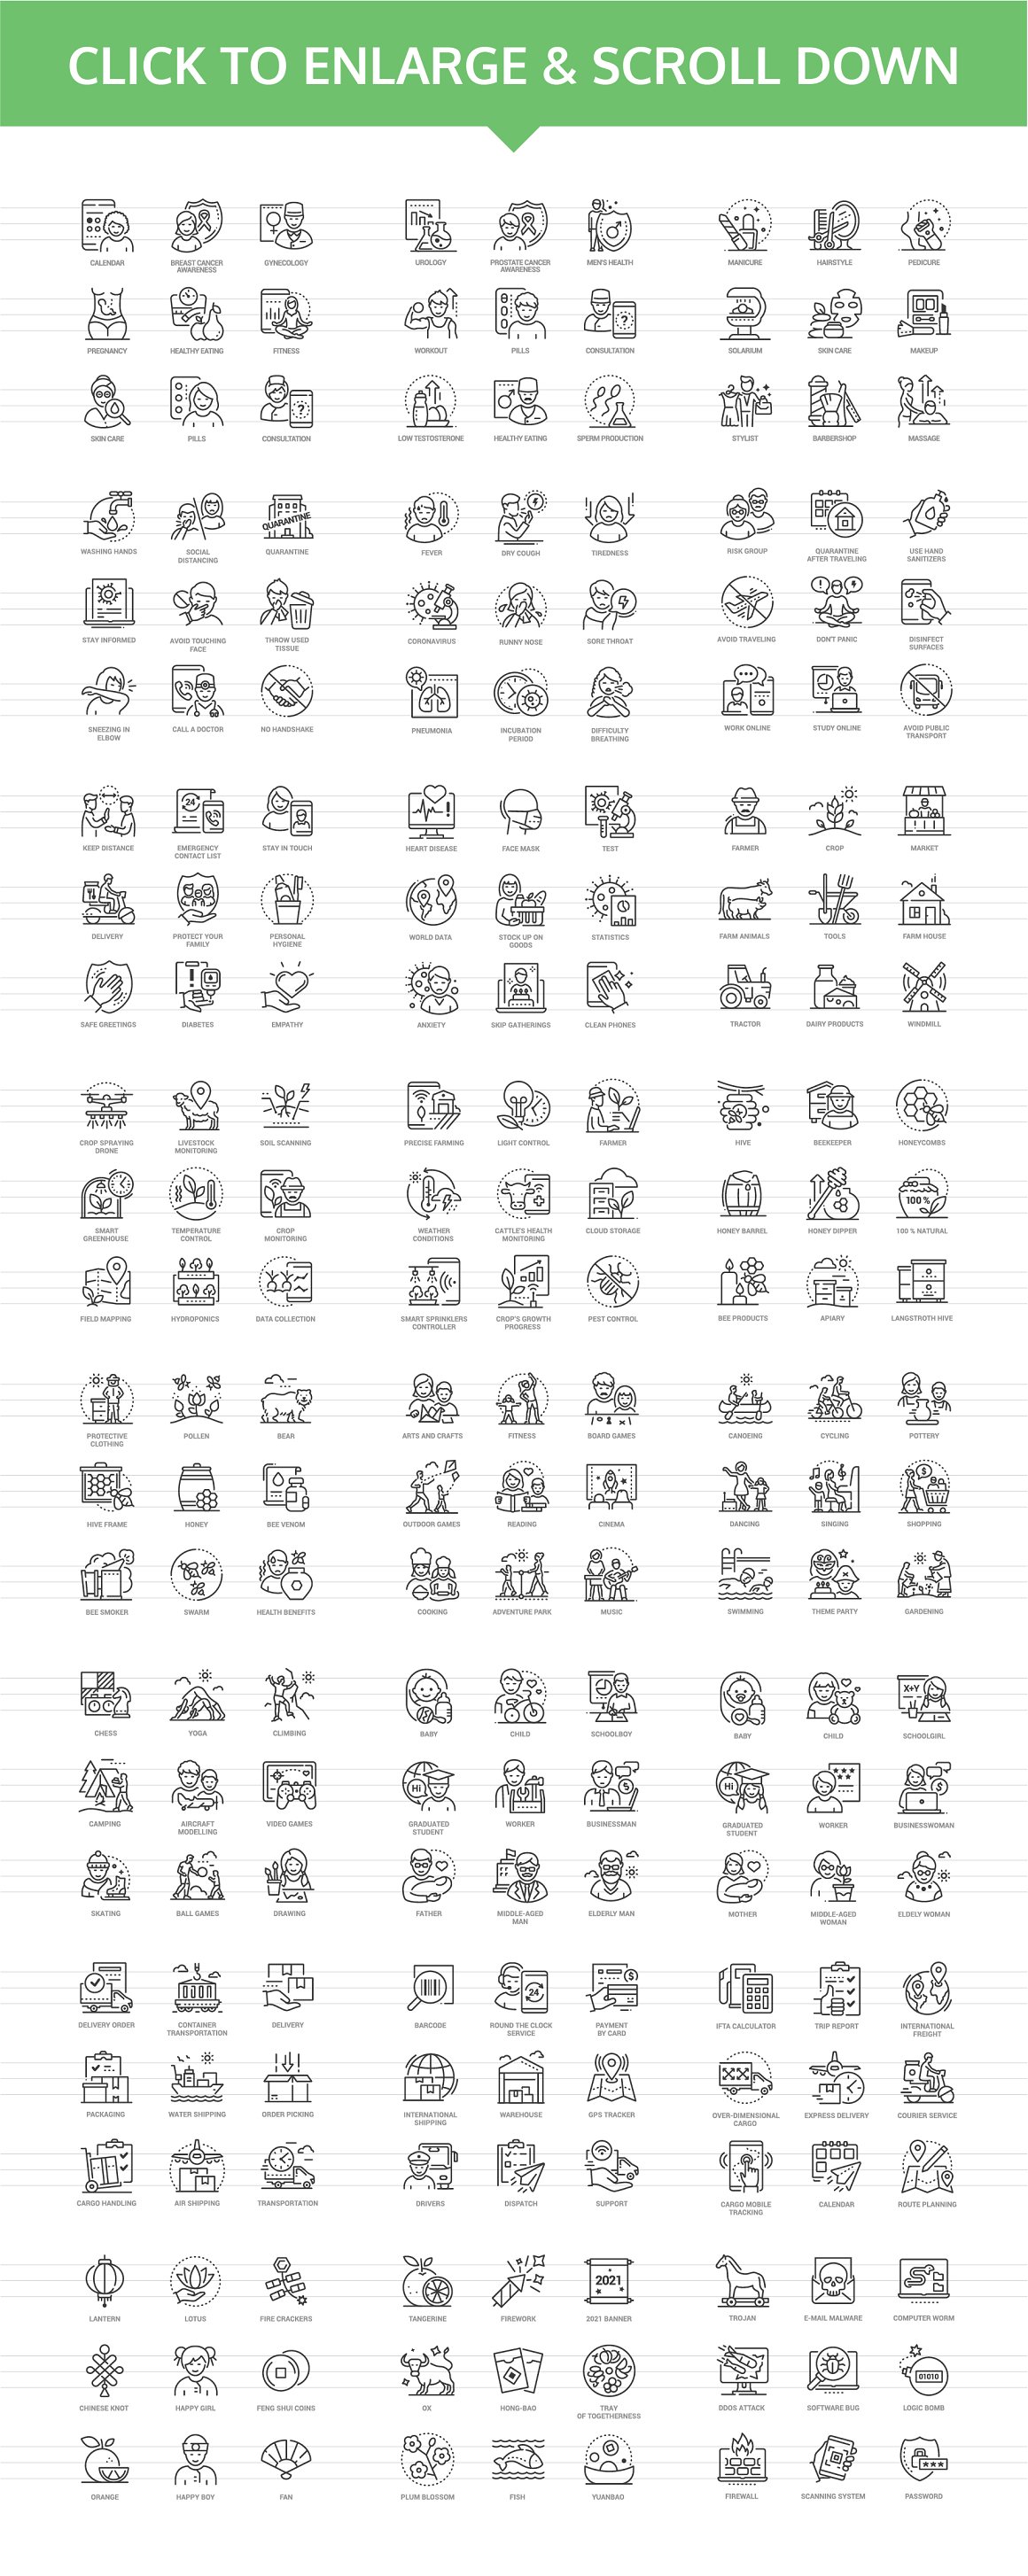 Bundle of different black innovicons icons on a white background.